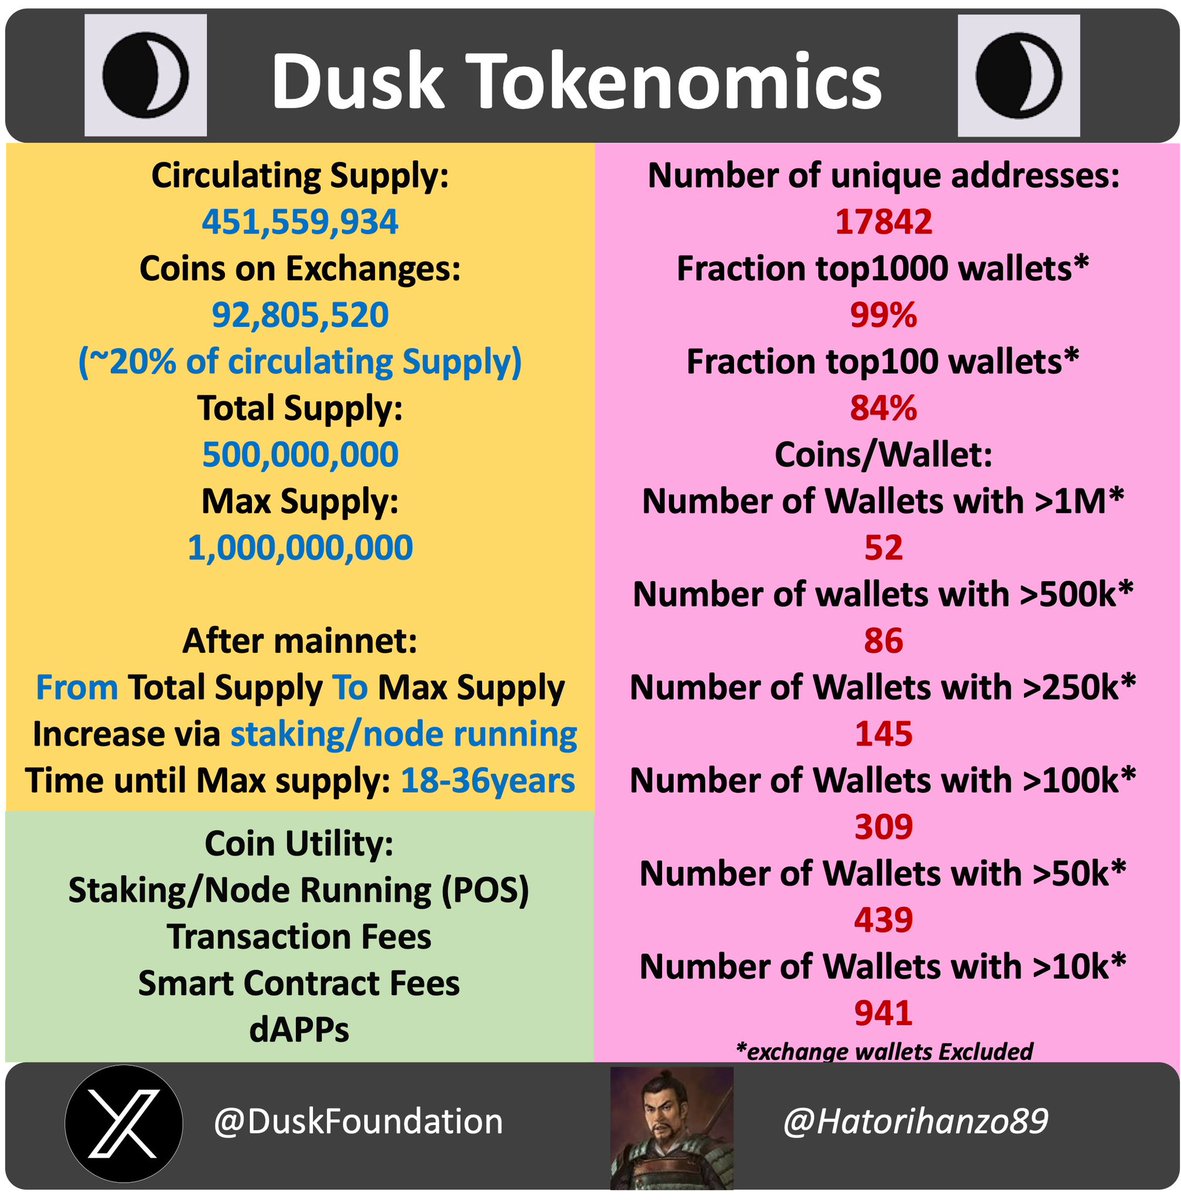 $dusk has one of the best tokenomics. More than 90% of total supply in circulation. After mainnet(april), staking will increase supply until max supply which will take 18-36years. Very good token distribution on non-exchange wallets. 
Coin utility: staking dapps p2p.
$azero $mina